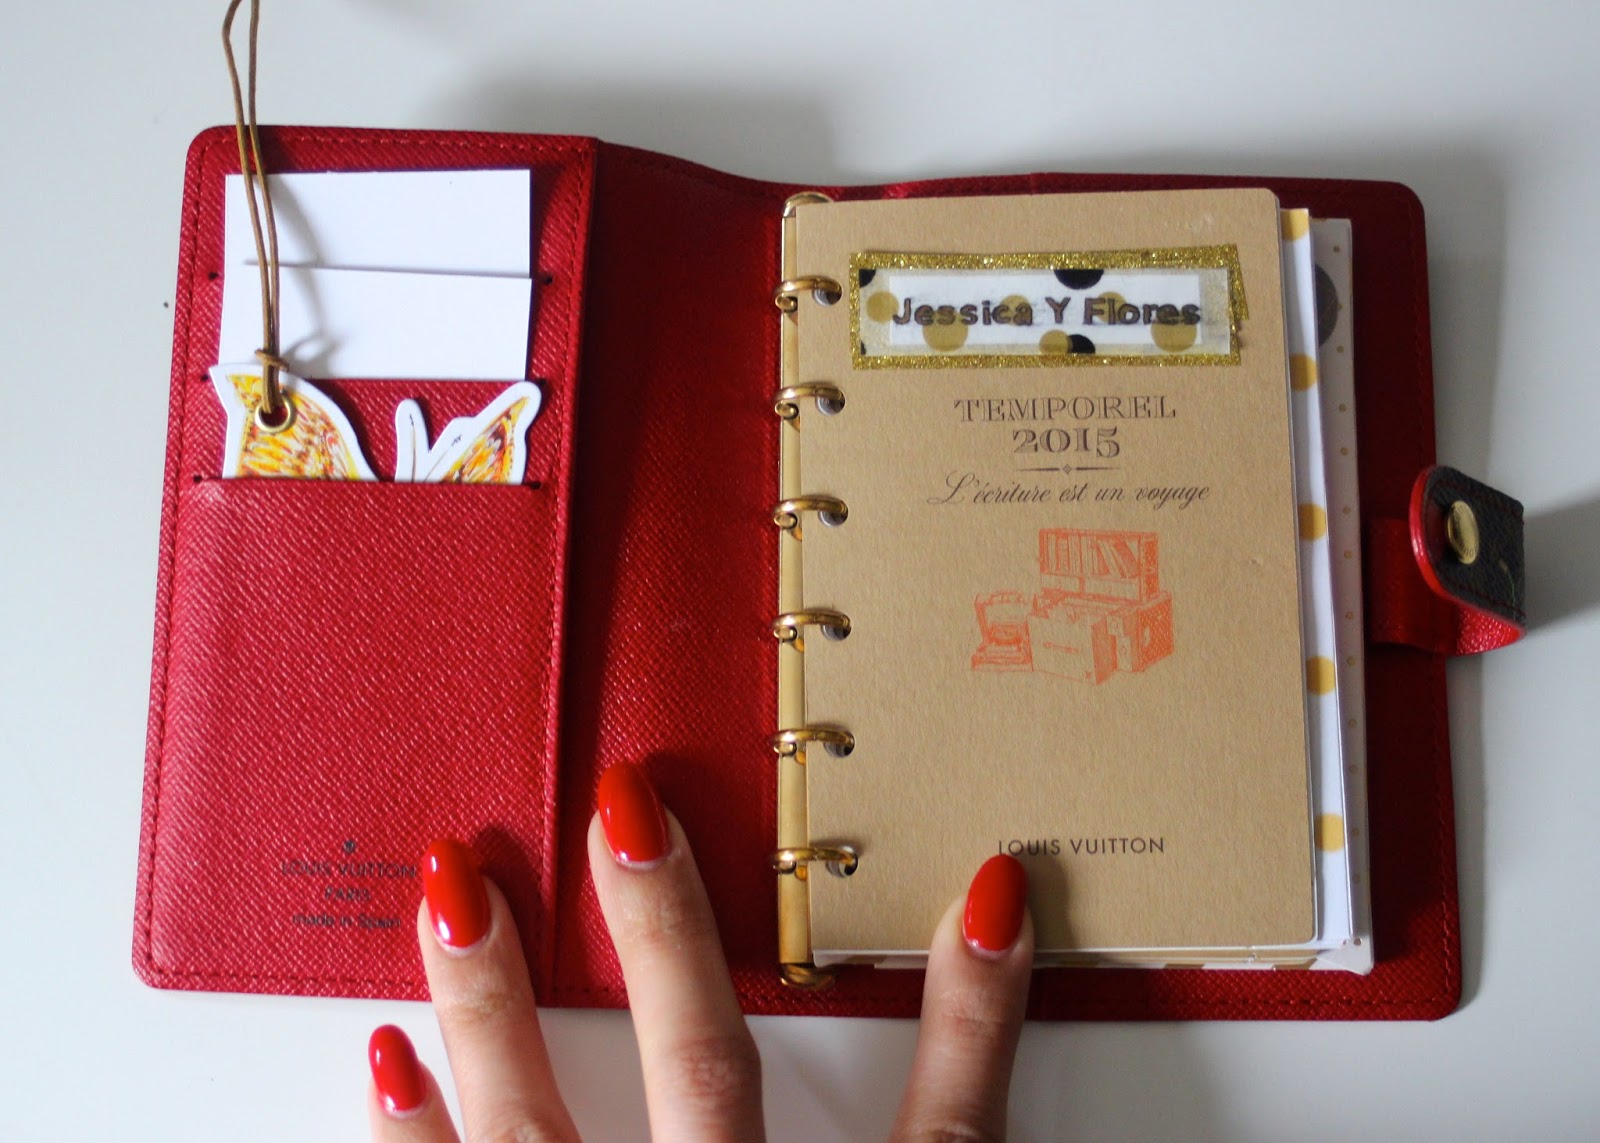 SET UP MY LV AGENDA WITH ME!! FT. CLOTH & PAPER 